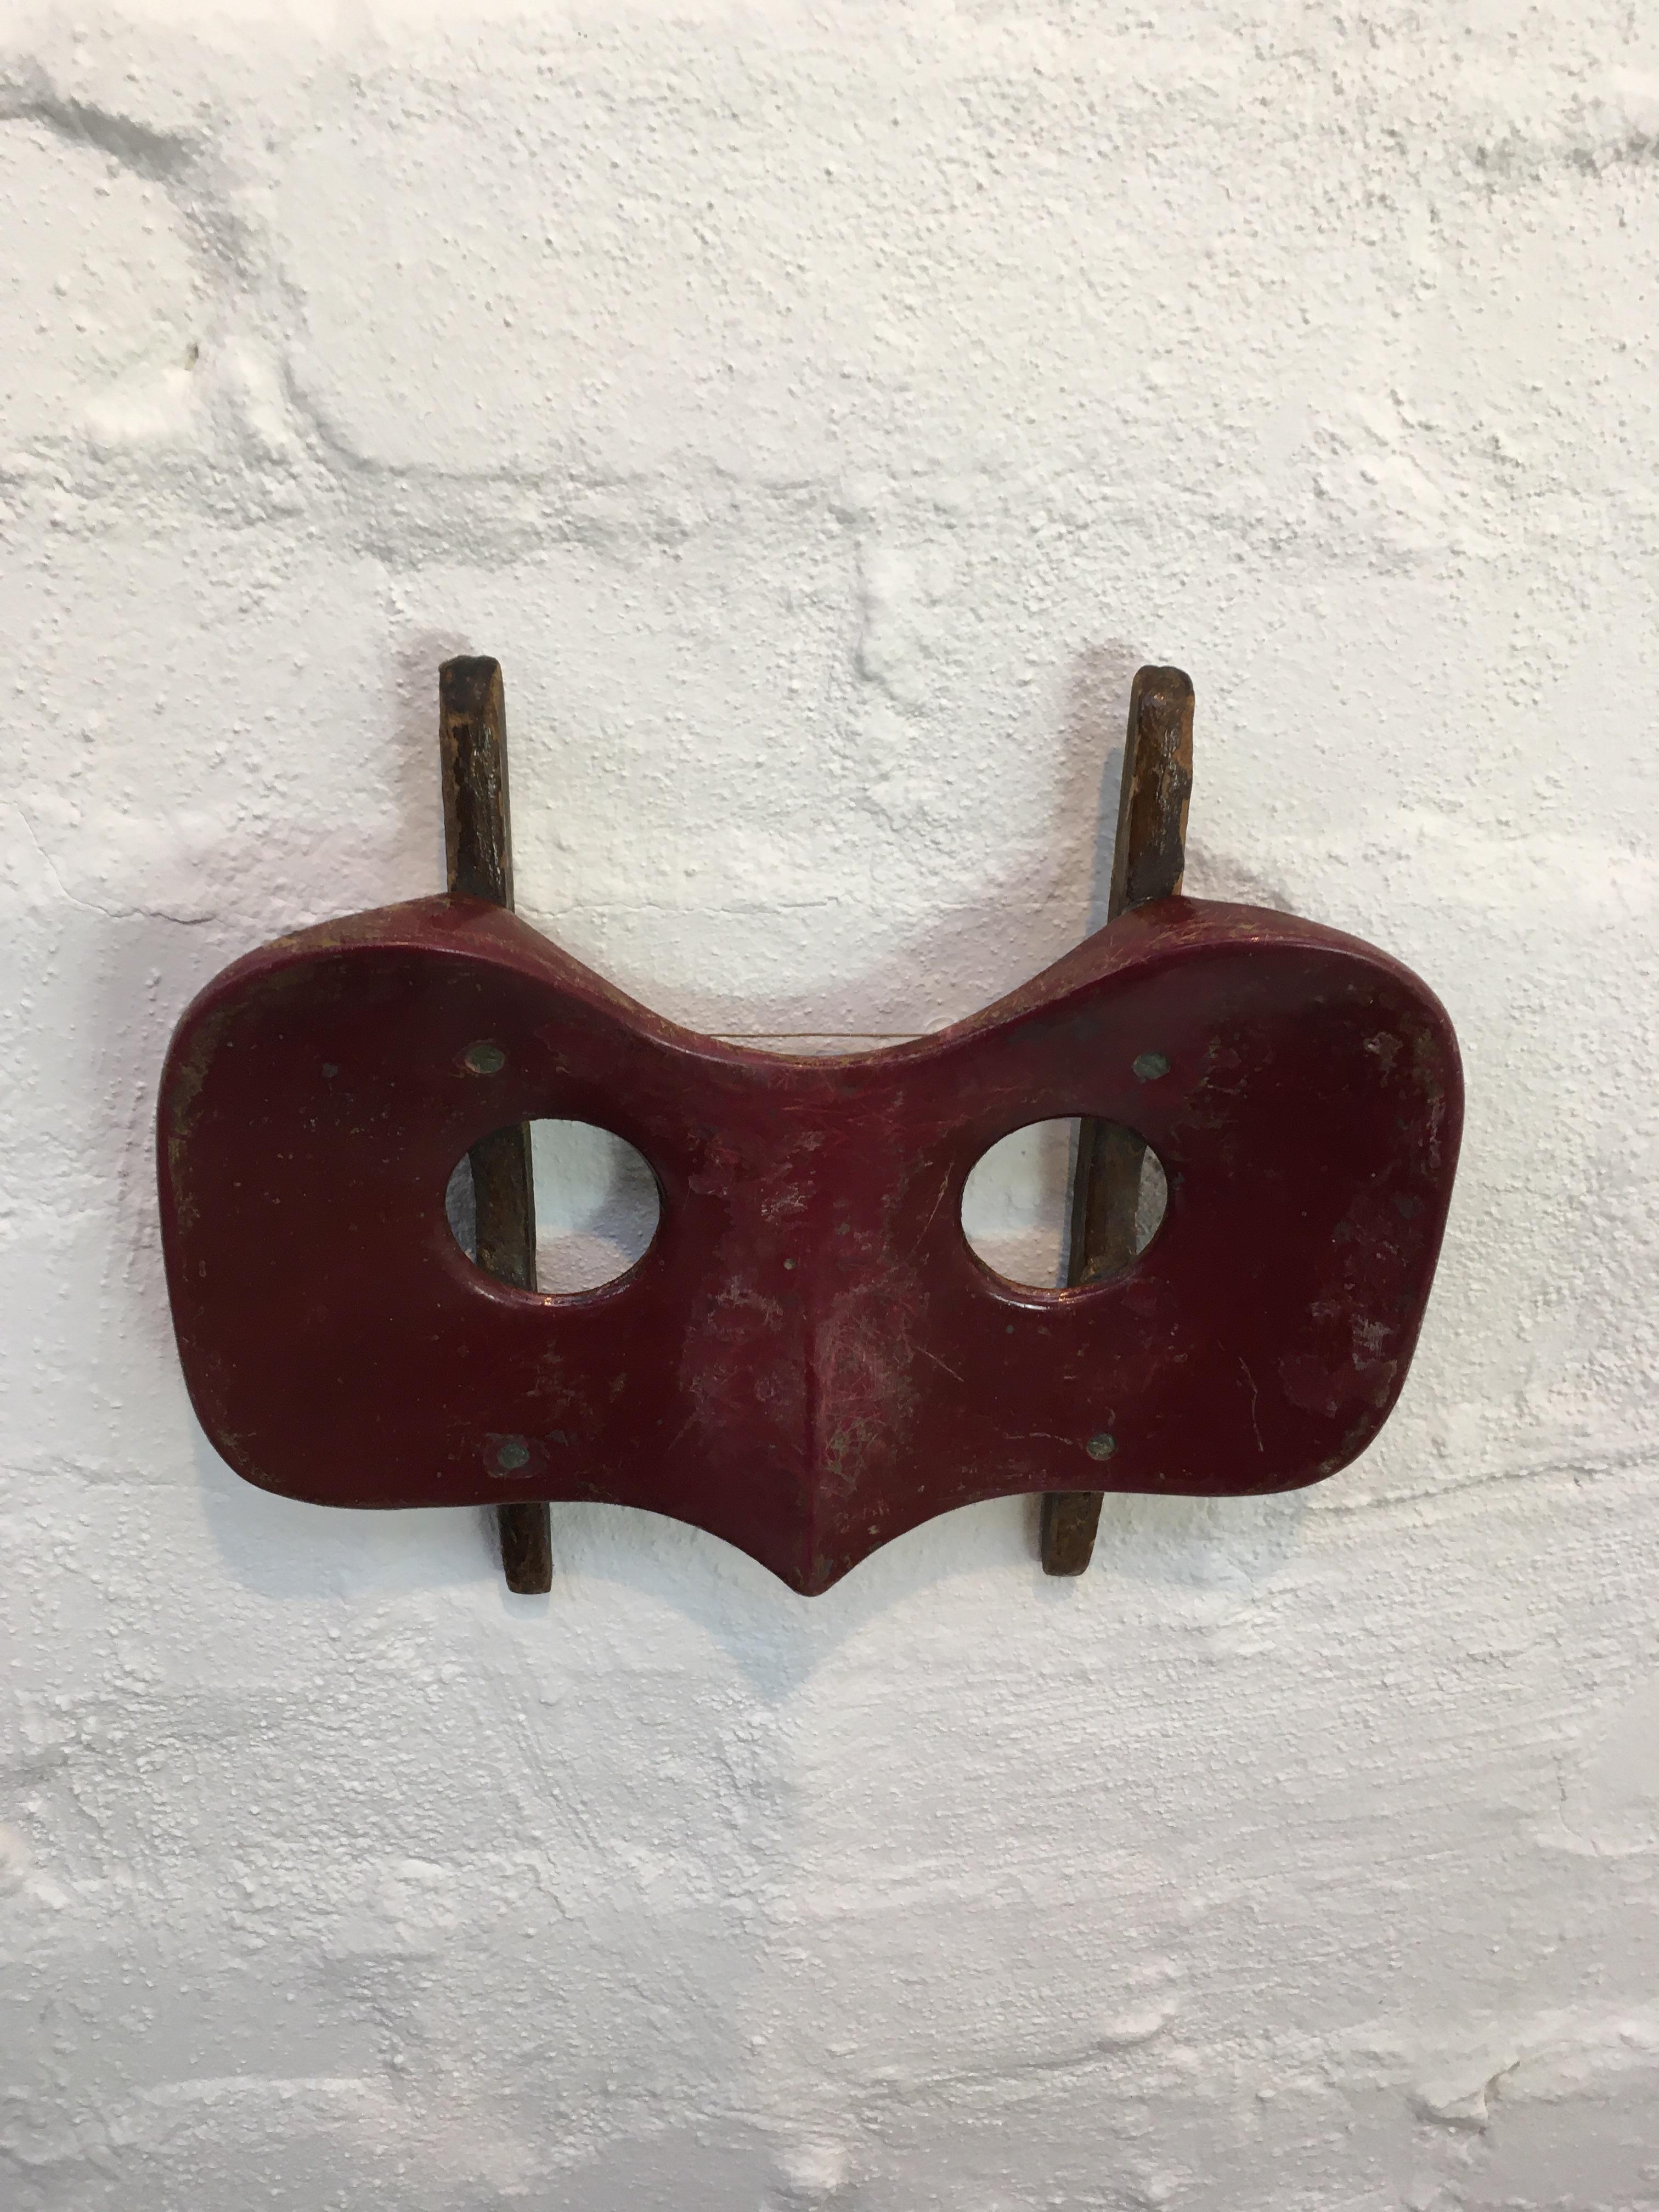 Polished Vintage Maroon Sculptural Wall Hanging Found Object Melbourne 1940s